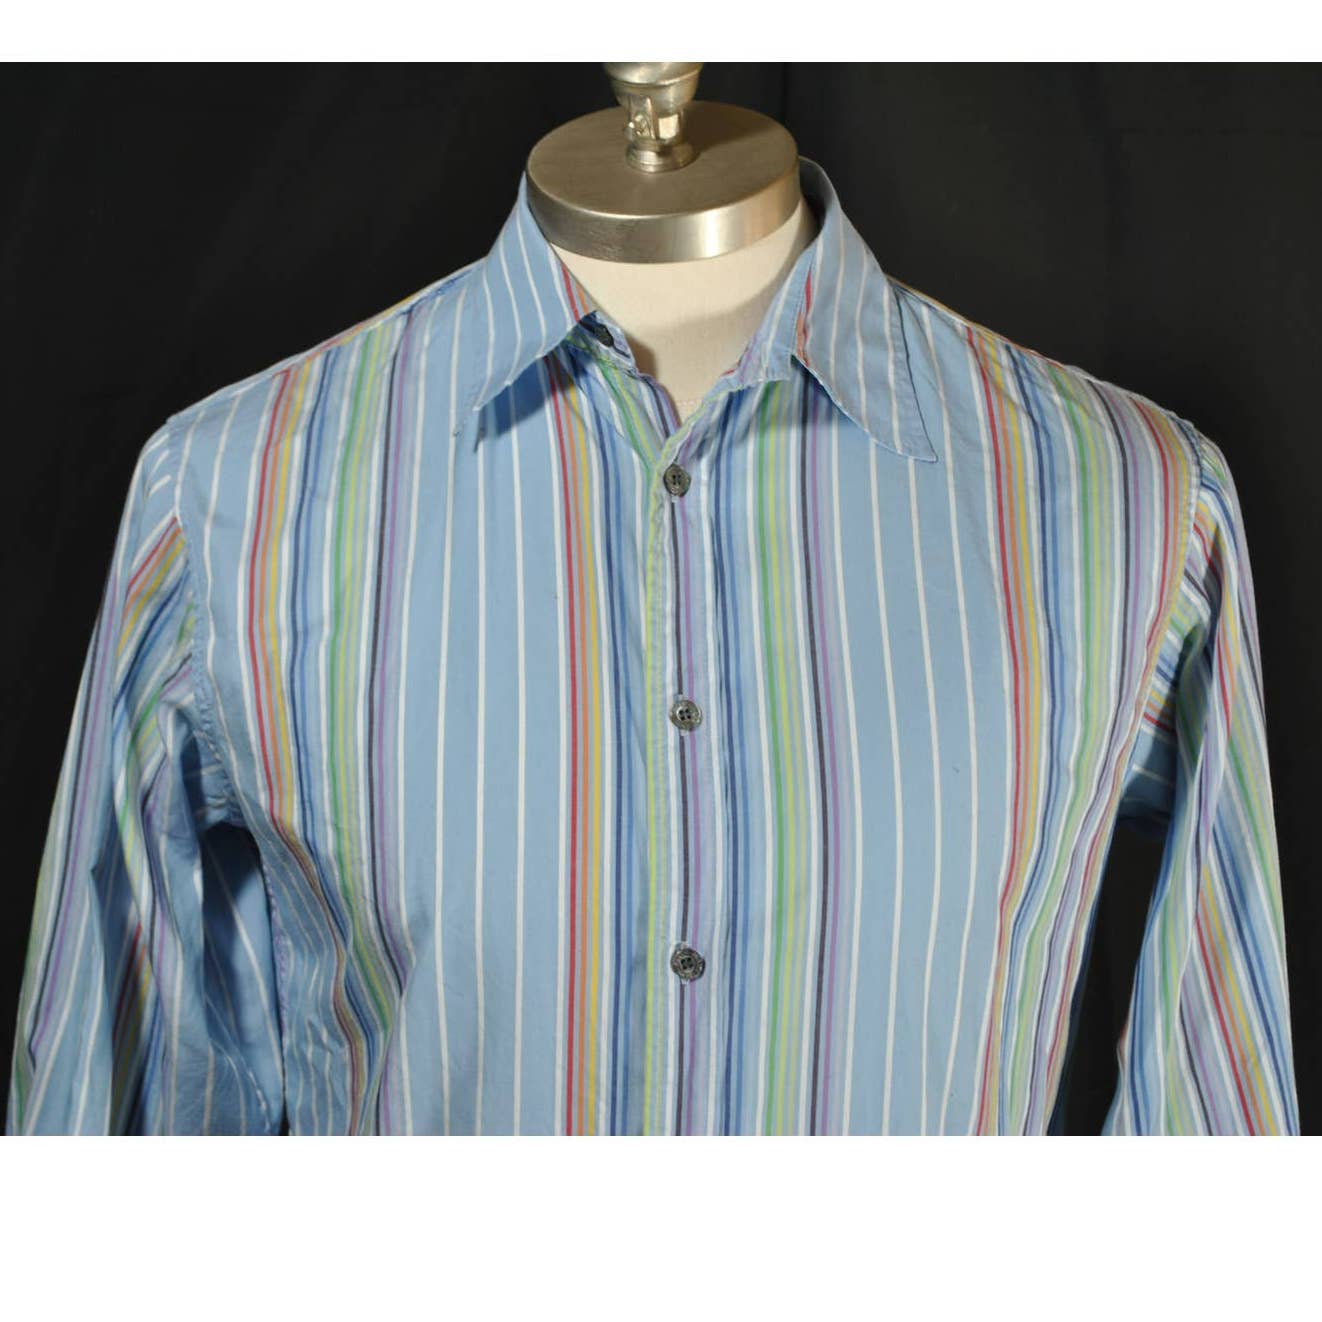 Paul Smith Jeans Blue Striped Button Up Shirt - S